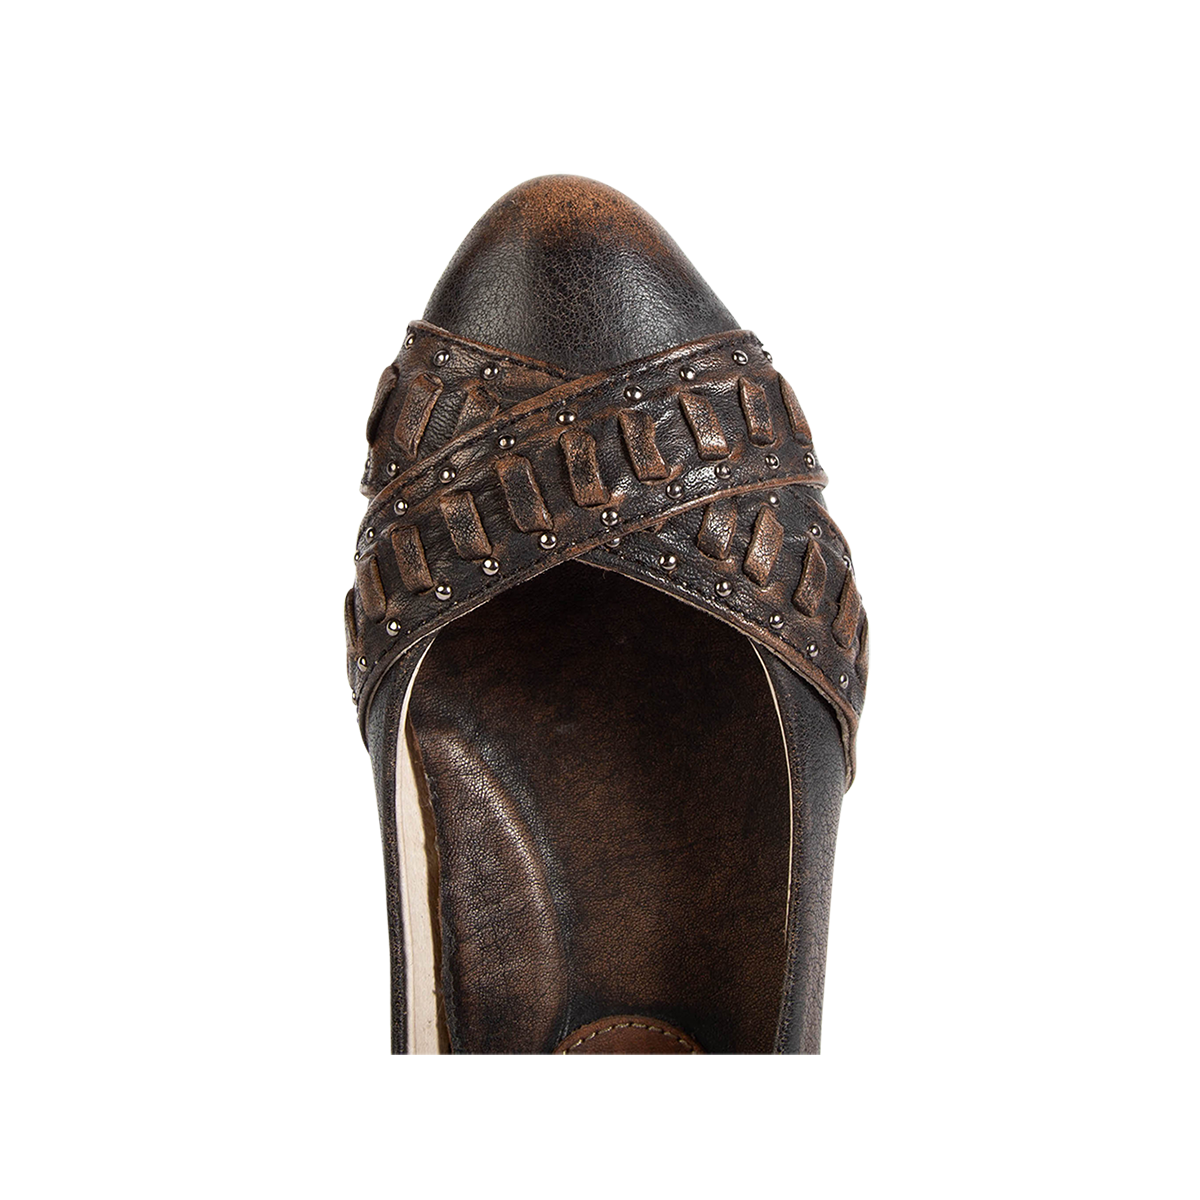 Top view showing leather overlay on FREEBIRD women's Brynn black ballet flat slip-on shoe featuring stud detailing a pointed toe